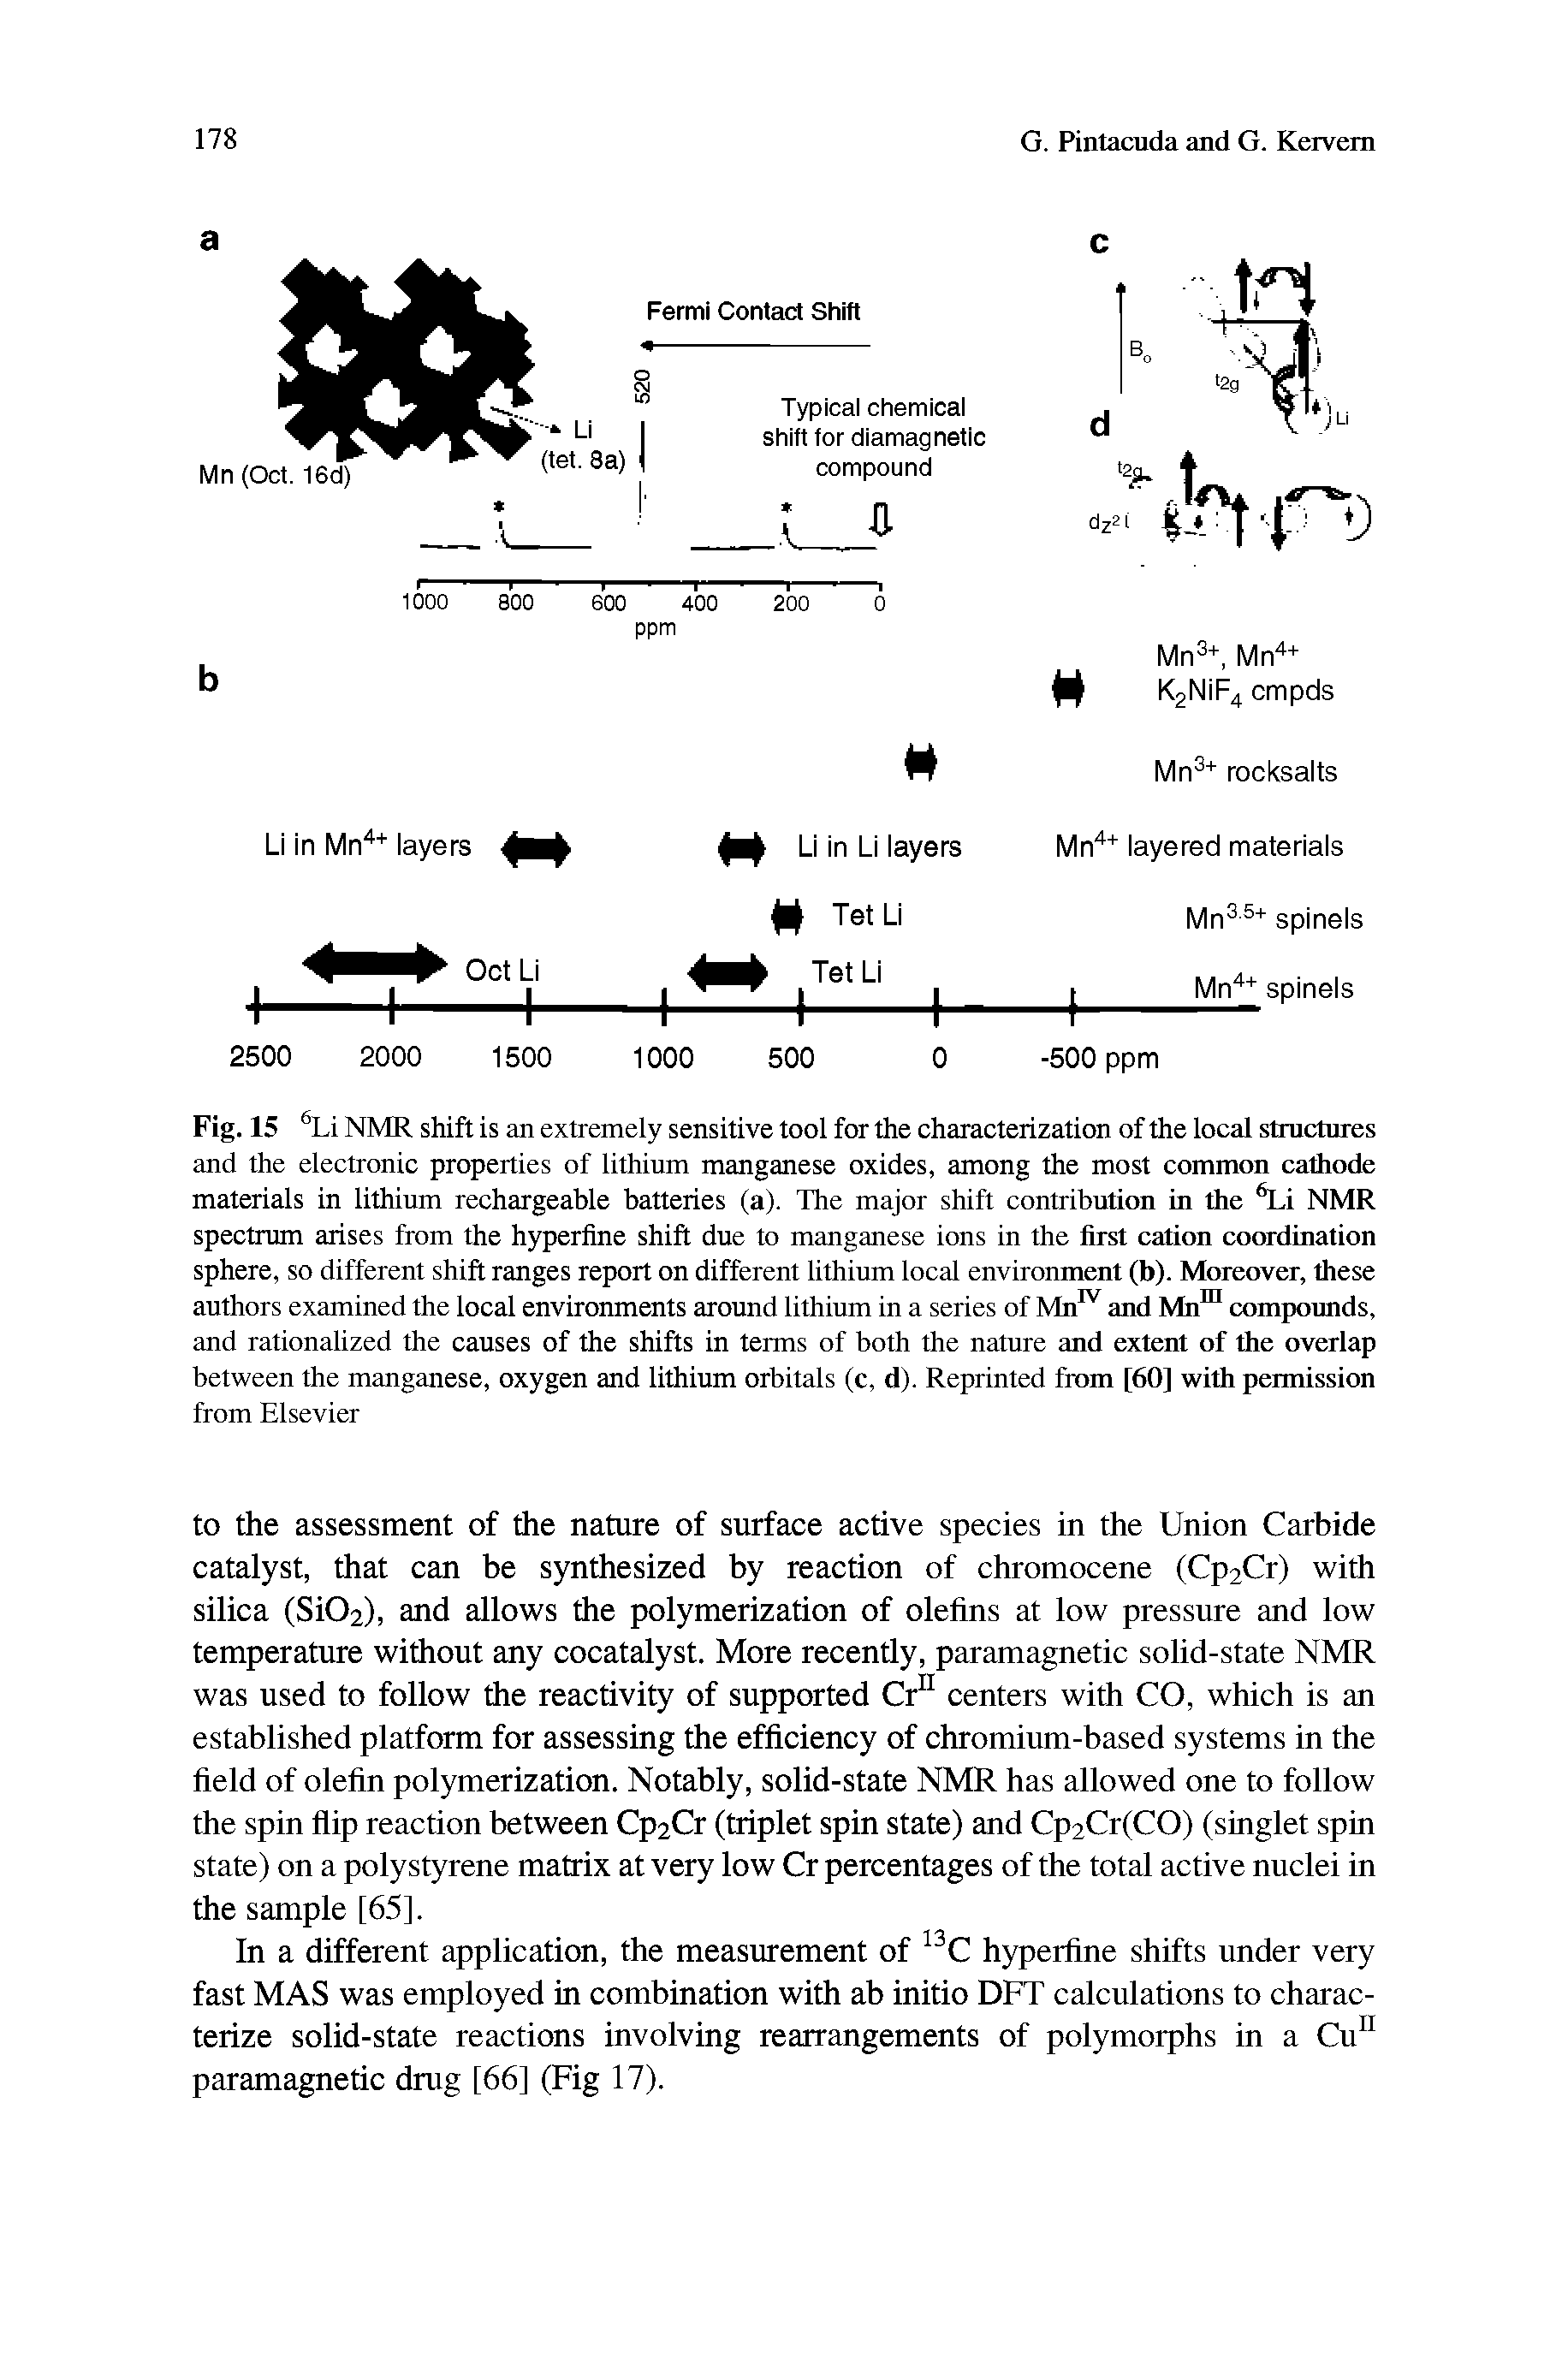 Fig. 15 Li NMR shift is an extremely sensitive tool for the characterization of the local structures and the electronic properties of lithium manganese oxides, among the most common cathode materials in lithium rechargeable batteries (a). The major shift contribution in the Li NMR spectrum arises from the hyperfine shift due to manganese ions in the first cation coradination sphere, so different shift ranges report on different lithium local environment (b). Moreover, these authors examined the local environments around lithium in a series of Mn and Mn compounds, and rationalized the causes of the shifts in terms of both the nature and extent of the overlap between the manganese, oxygen and lithium orbitals (c, d). Reprinted from [60] with permission from Elsevier...